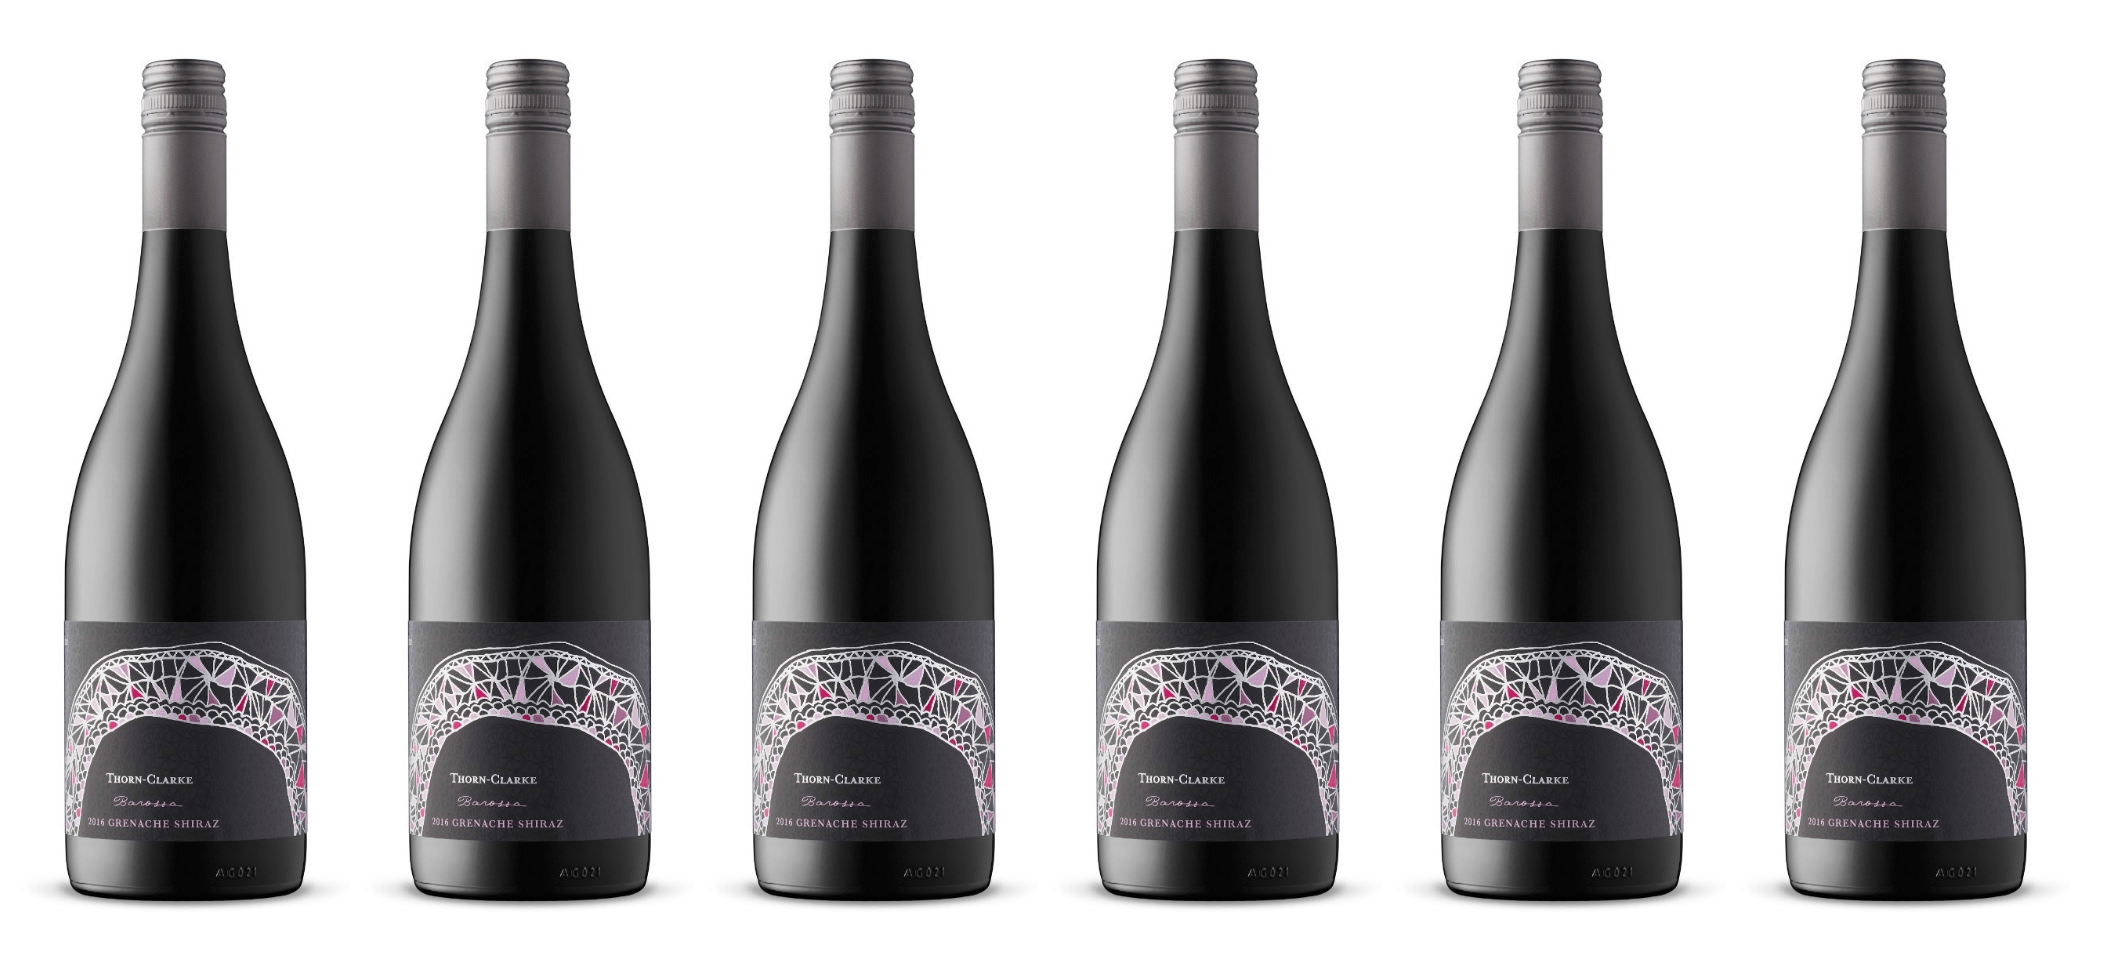 Try This : A Deliciously Juicy Grenache/Shiraz from Barossa